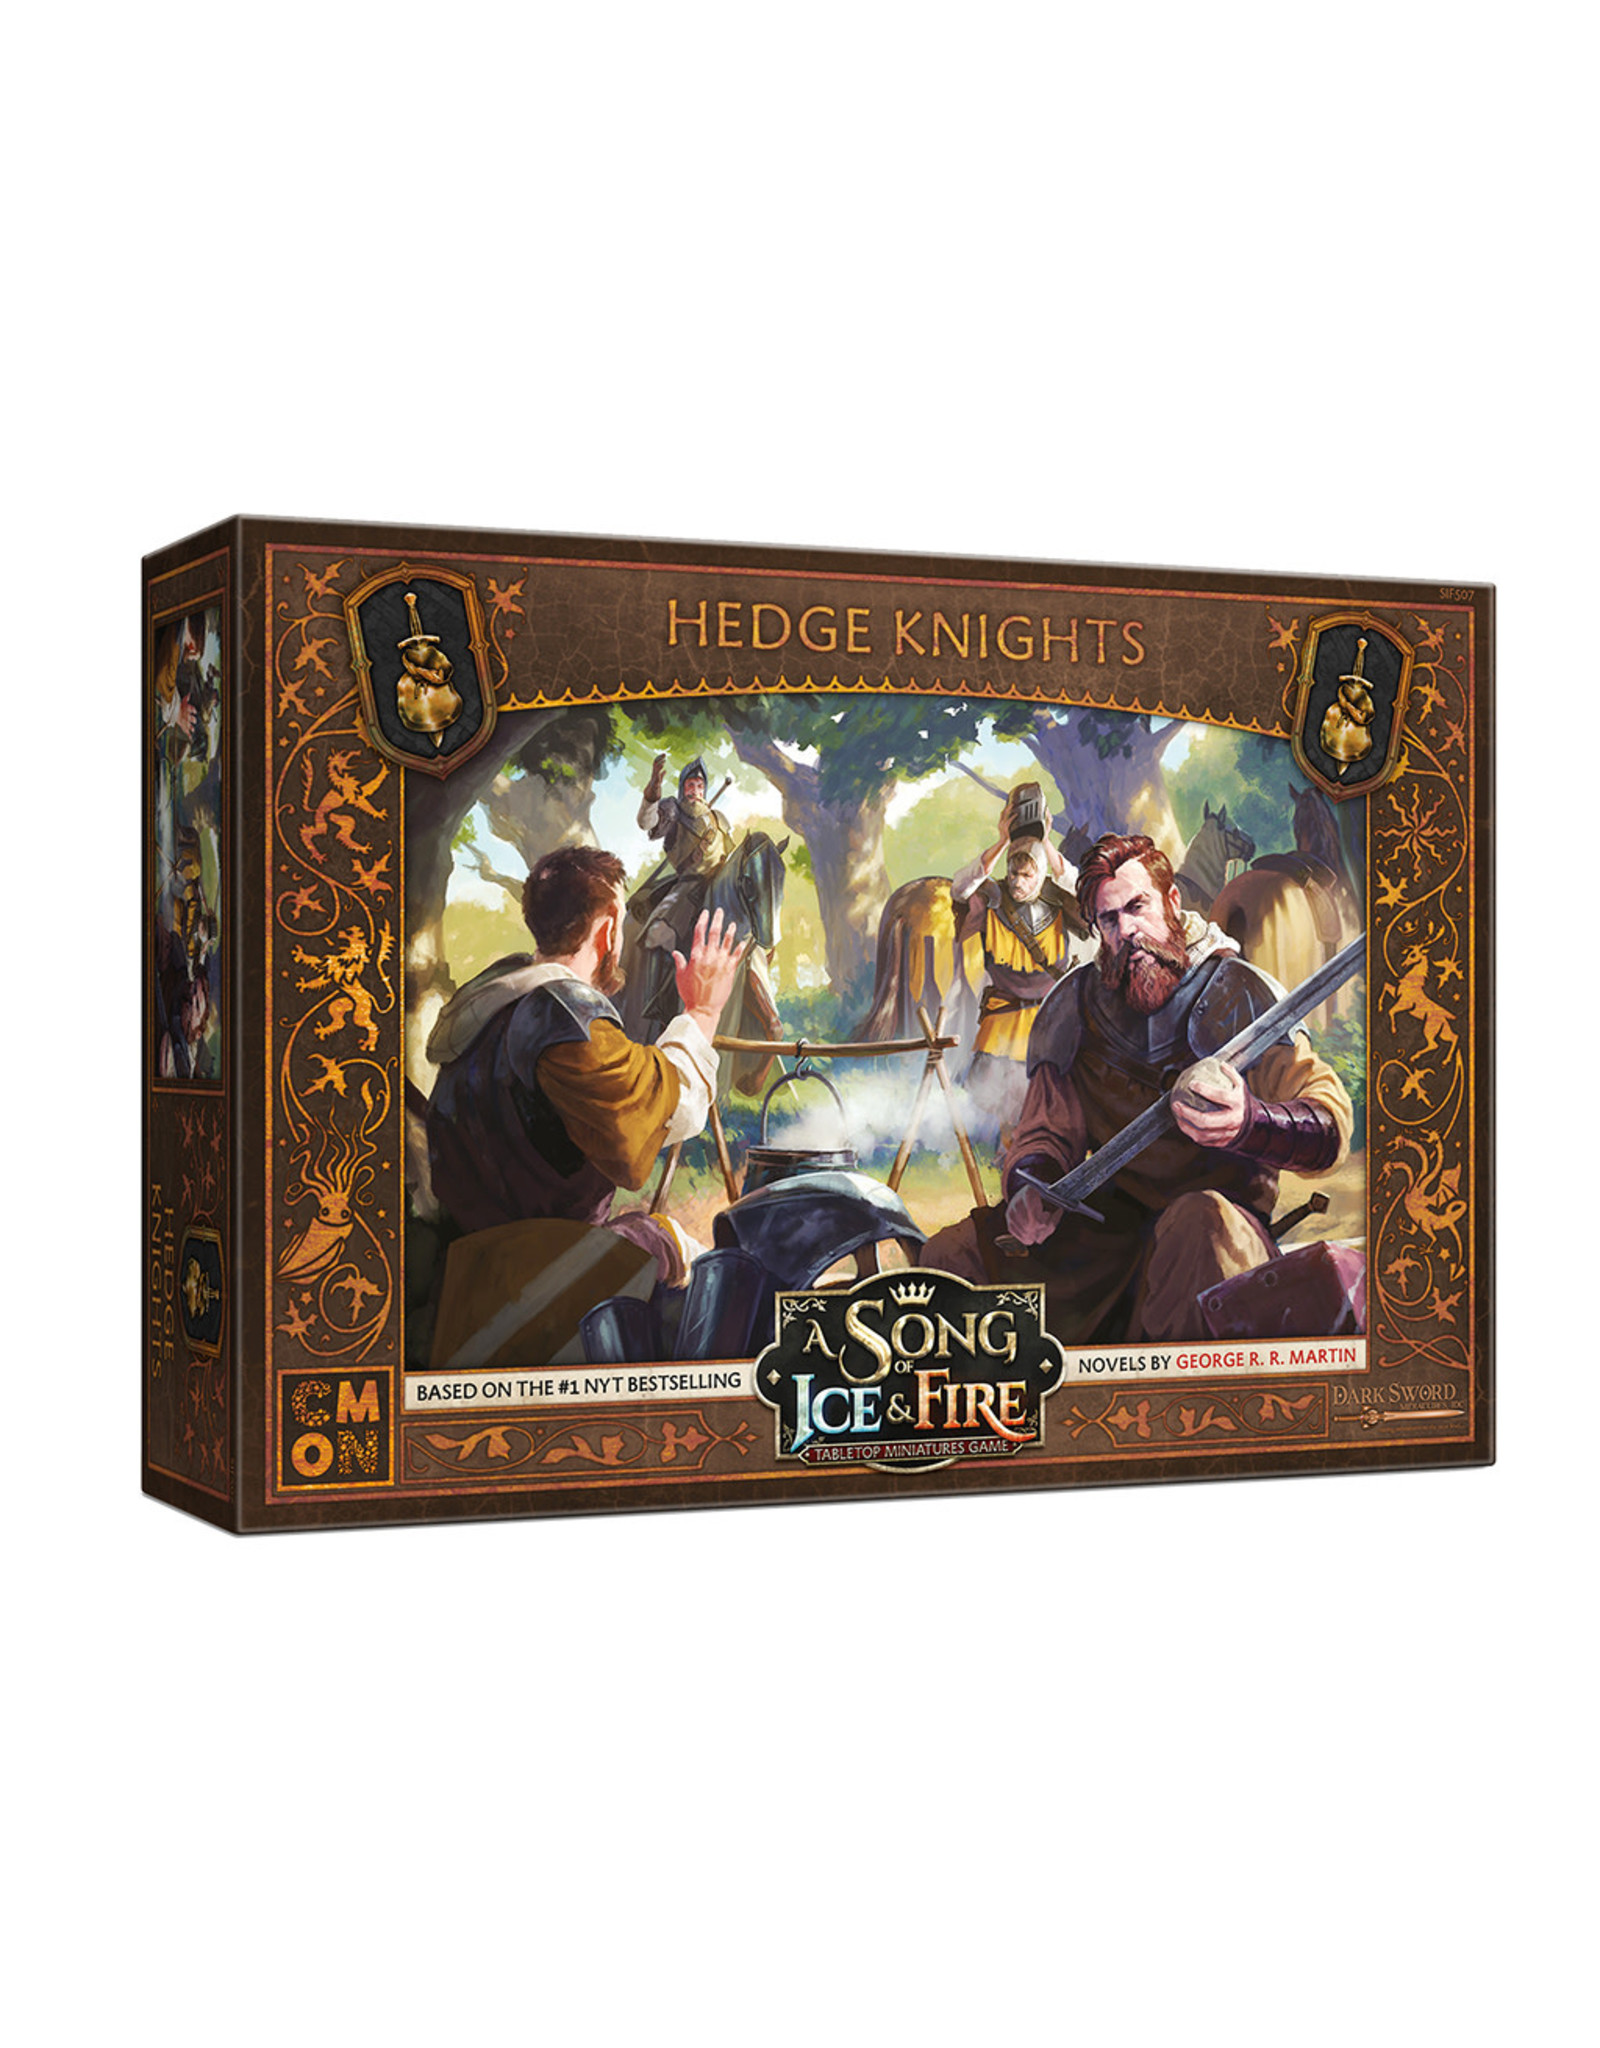 Cool Mini or Not A Song of Ice and Fire: Neutral Hedge Knights